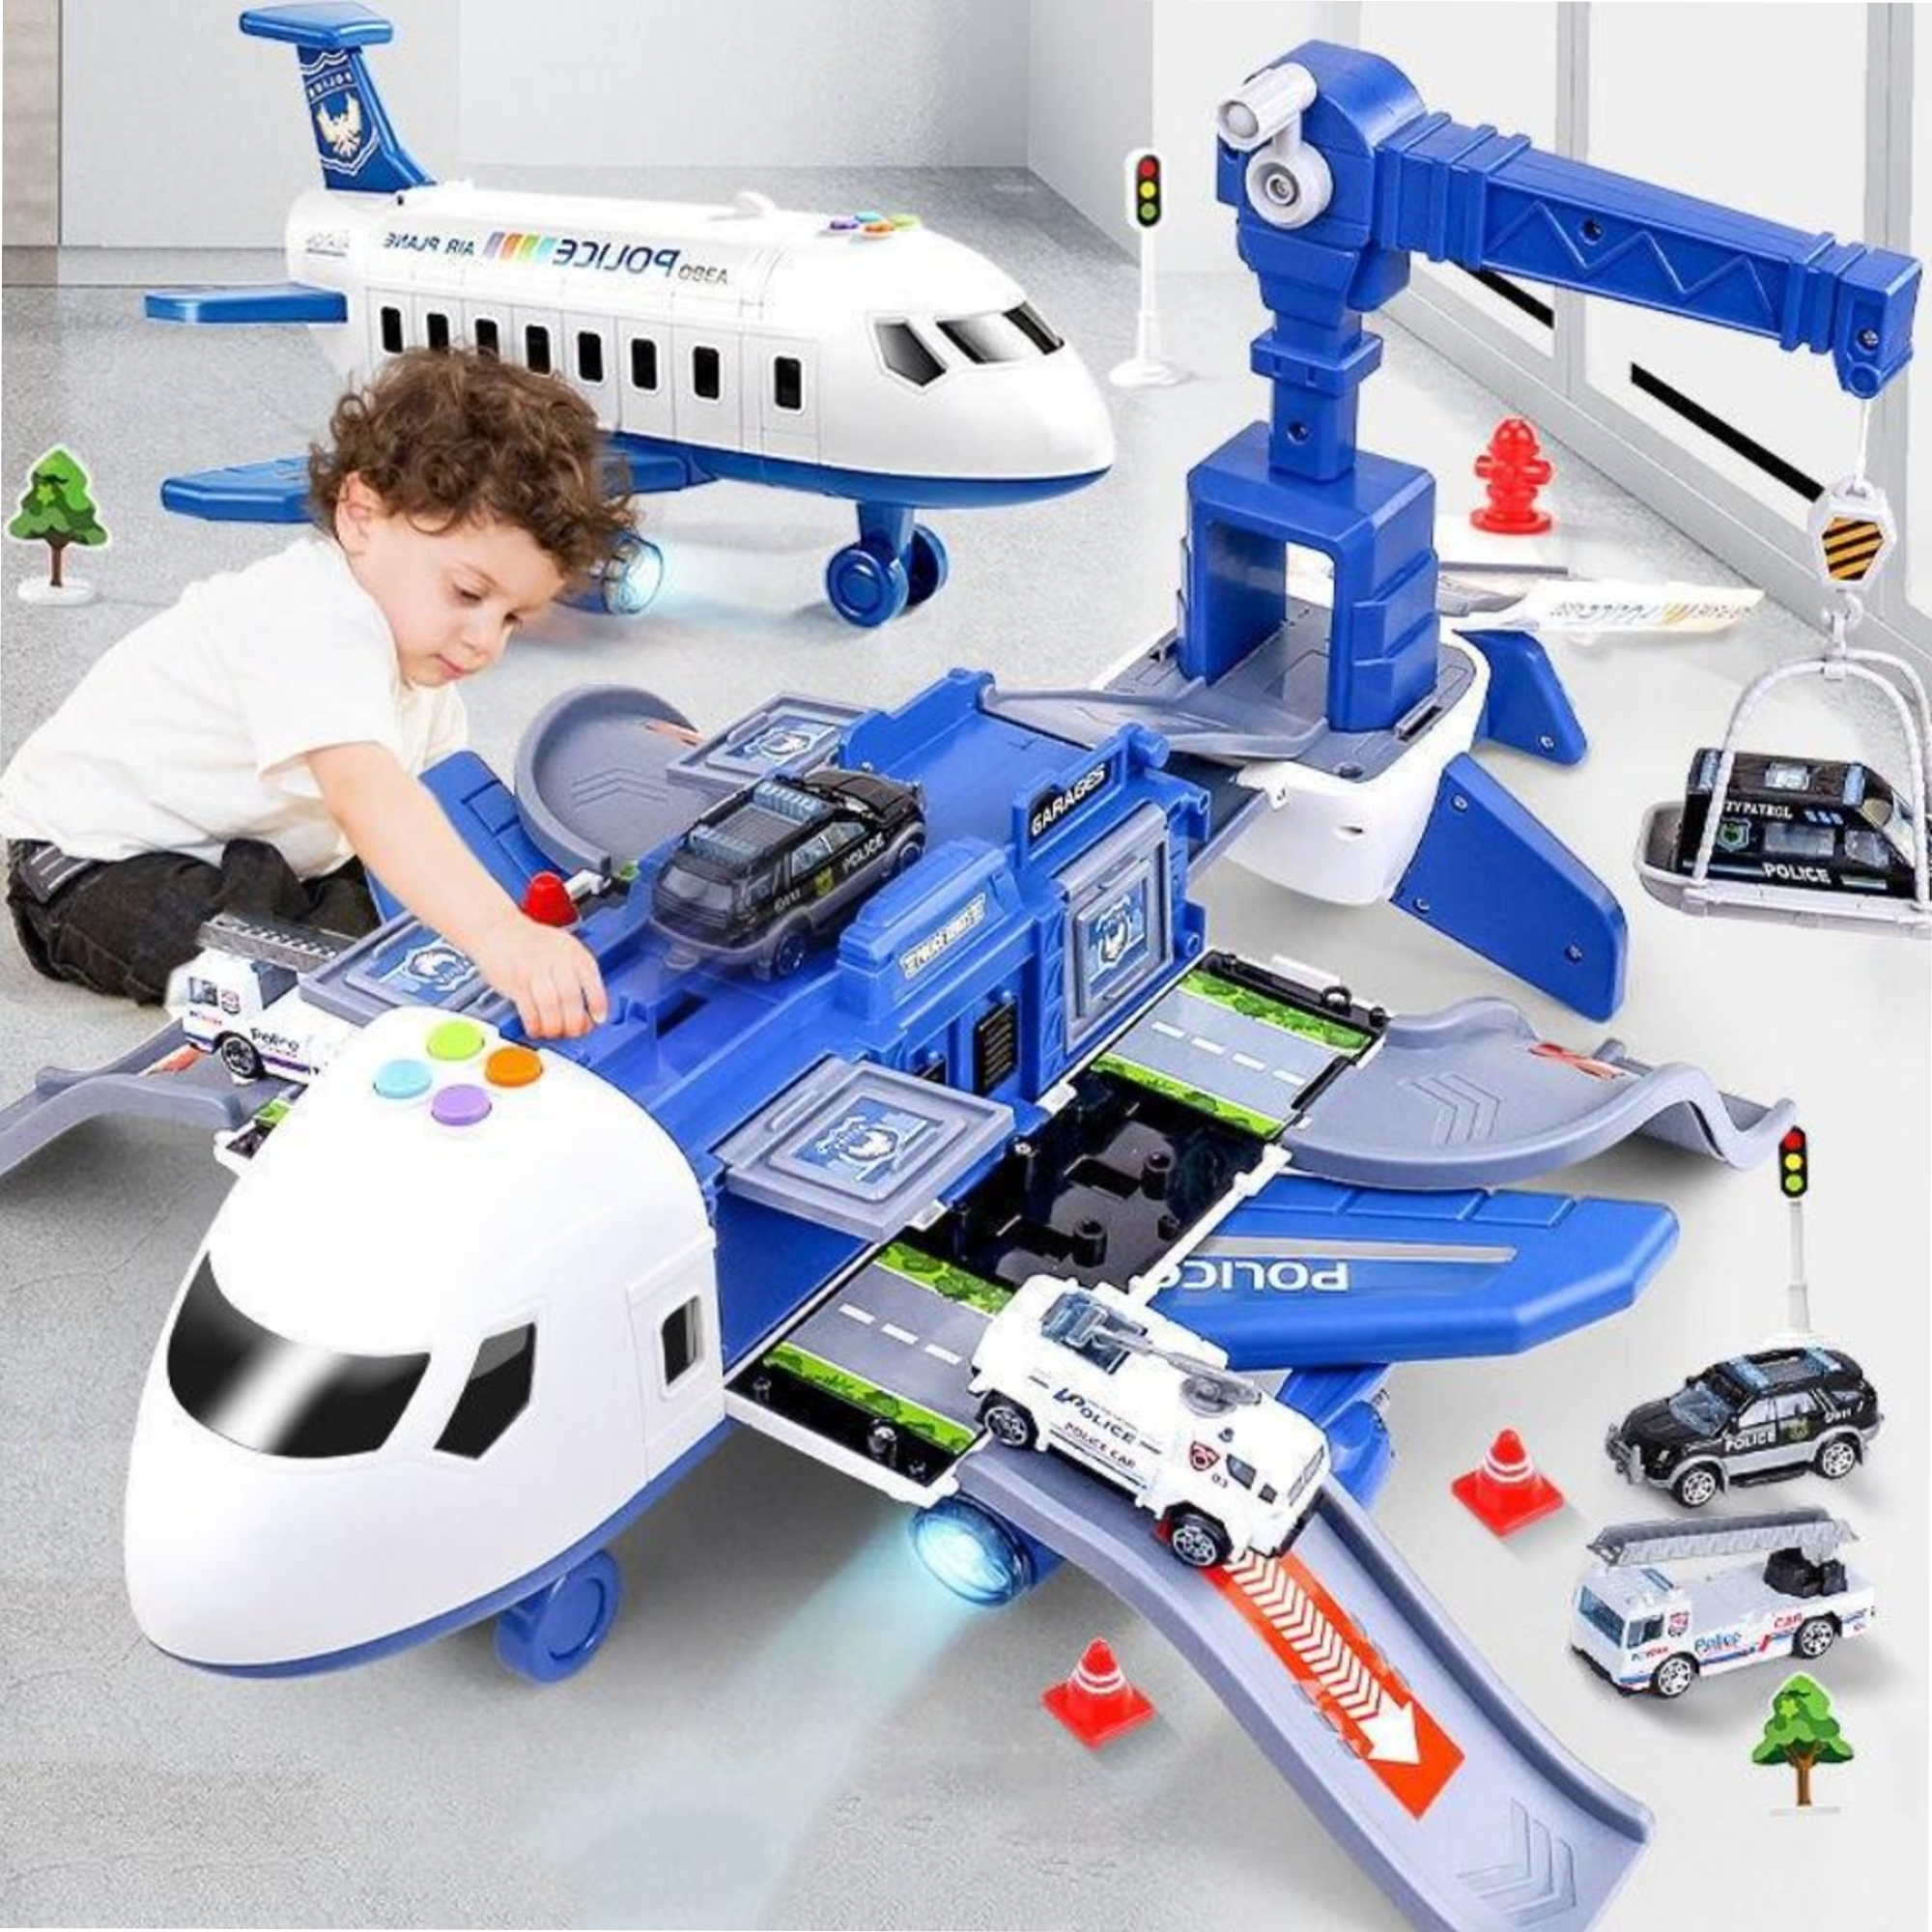 XL Airplane Vehicle Play Sets (3 Styles) Police, Construction or Fireman